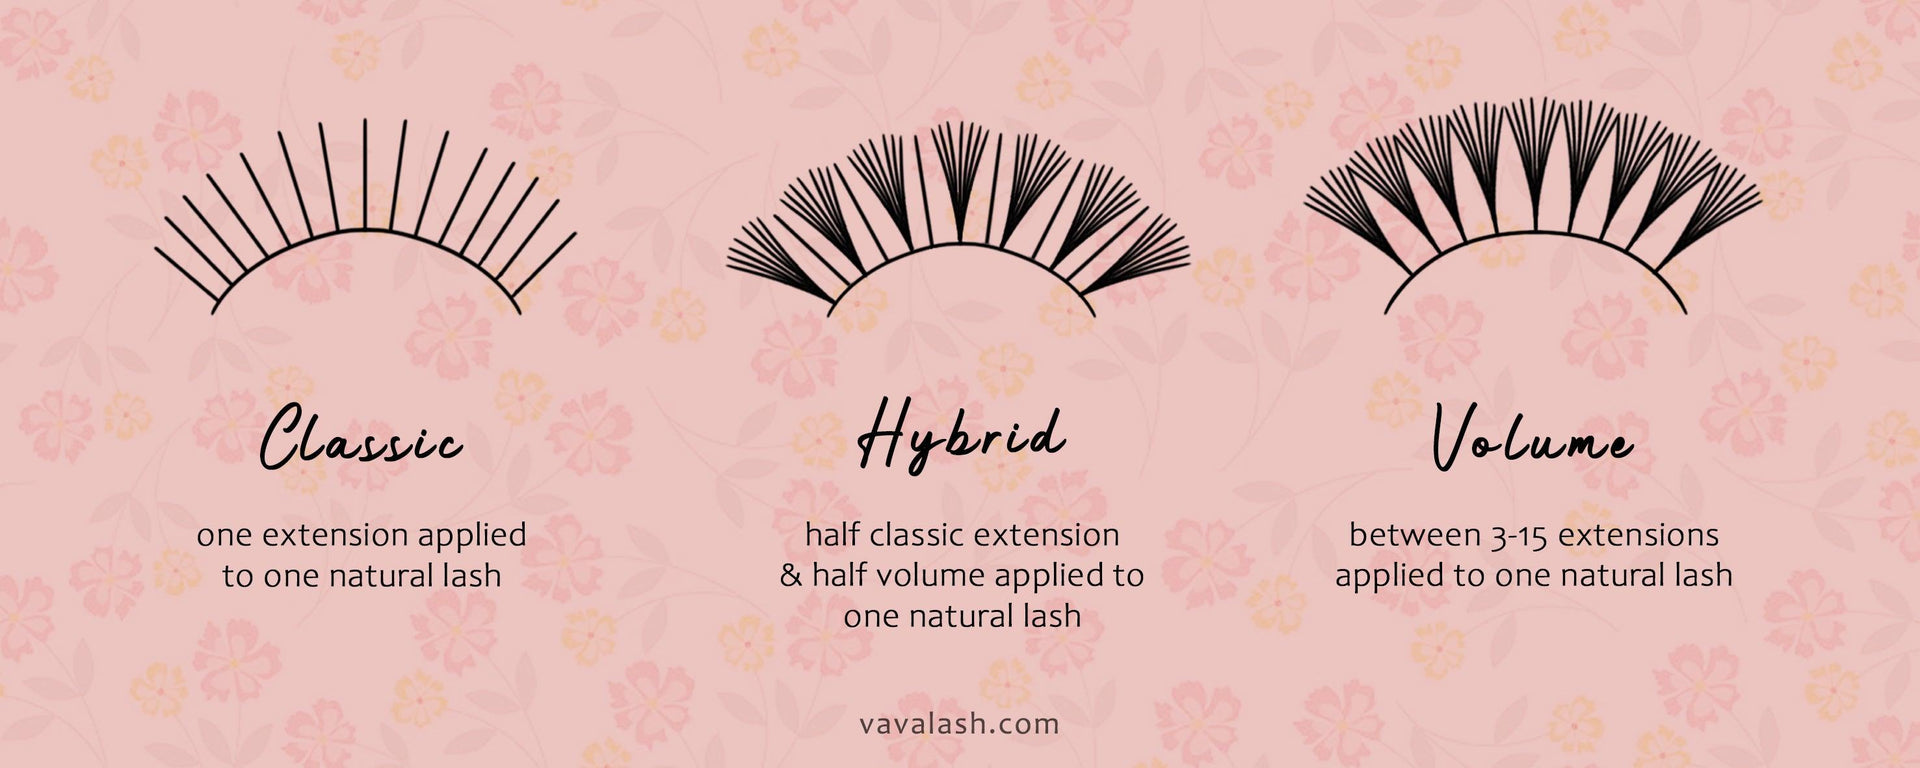 Everything You Need To Know About Hybrid Lashes Type - VAVALASH